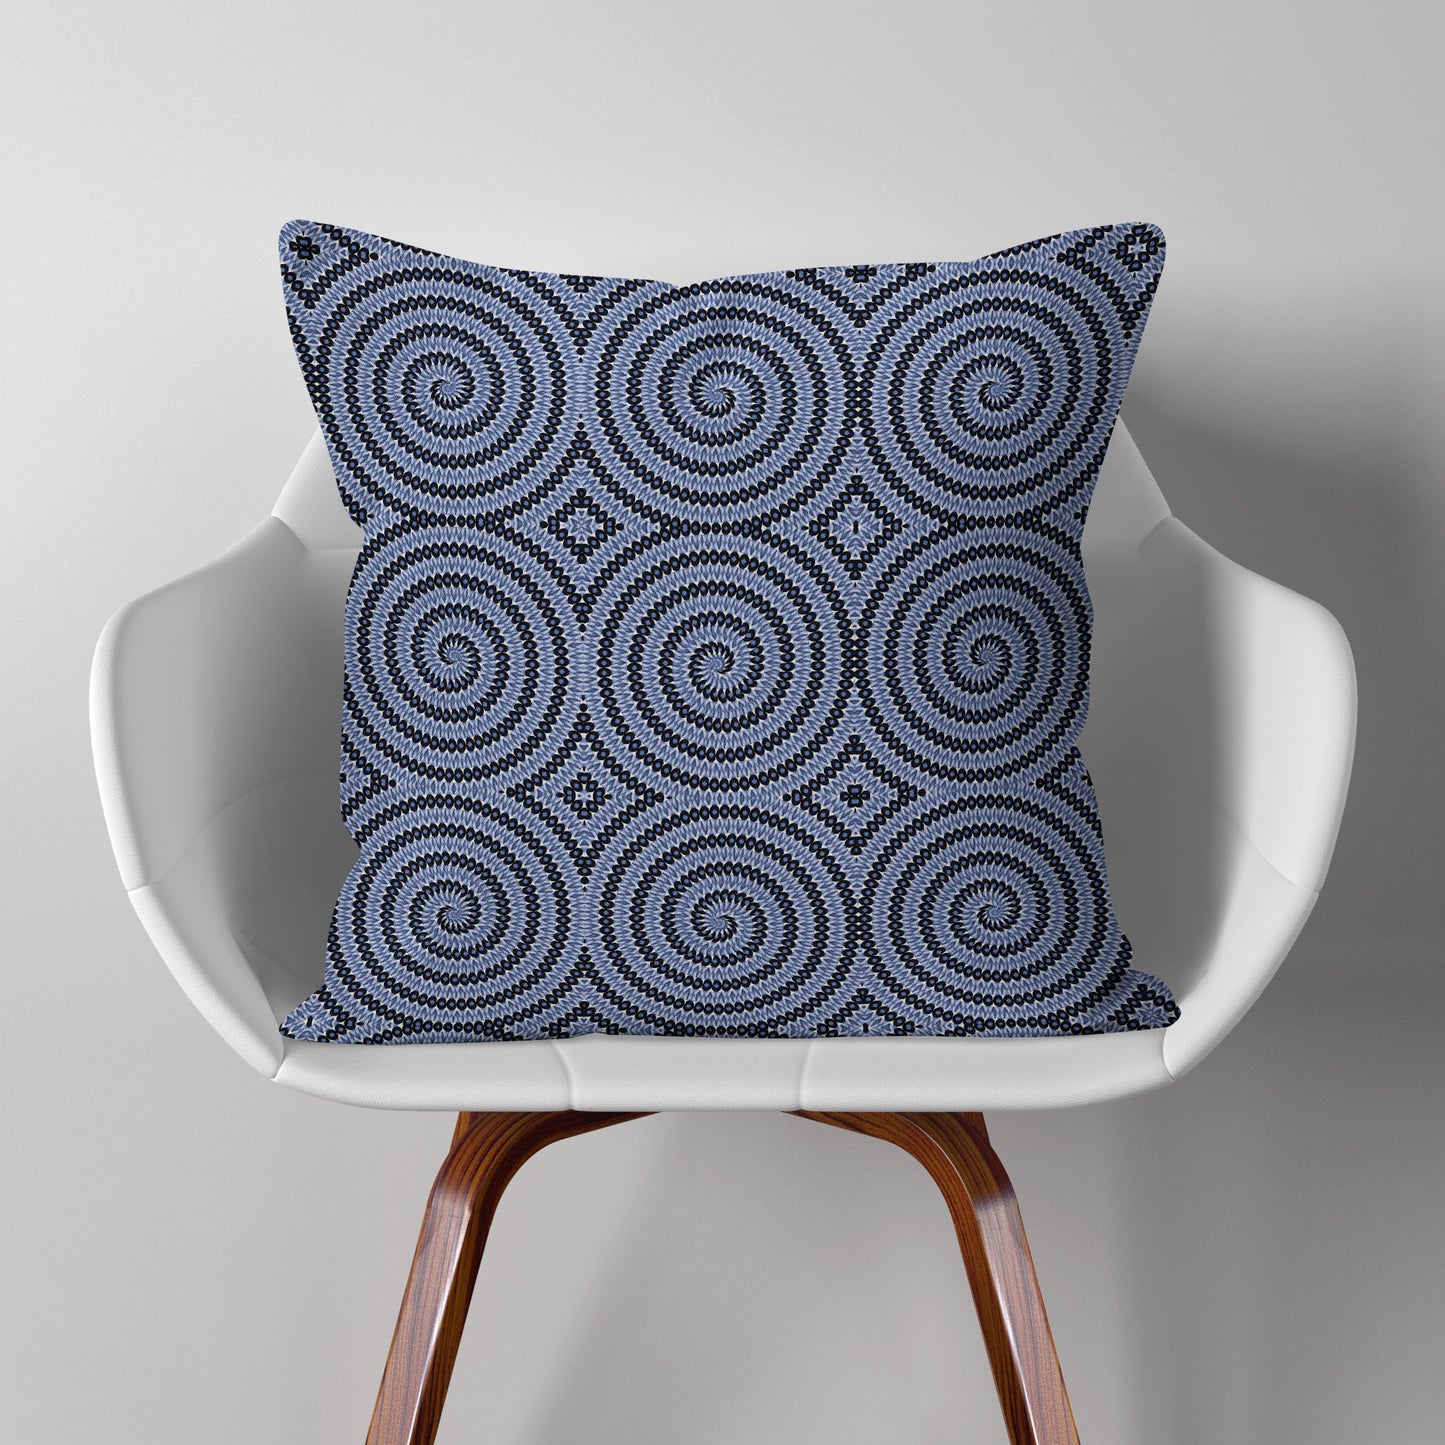 Pillow featuring geometric circular pattern in blue and white, sitting on a modern white chair